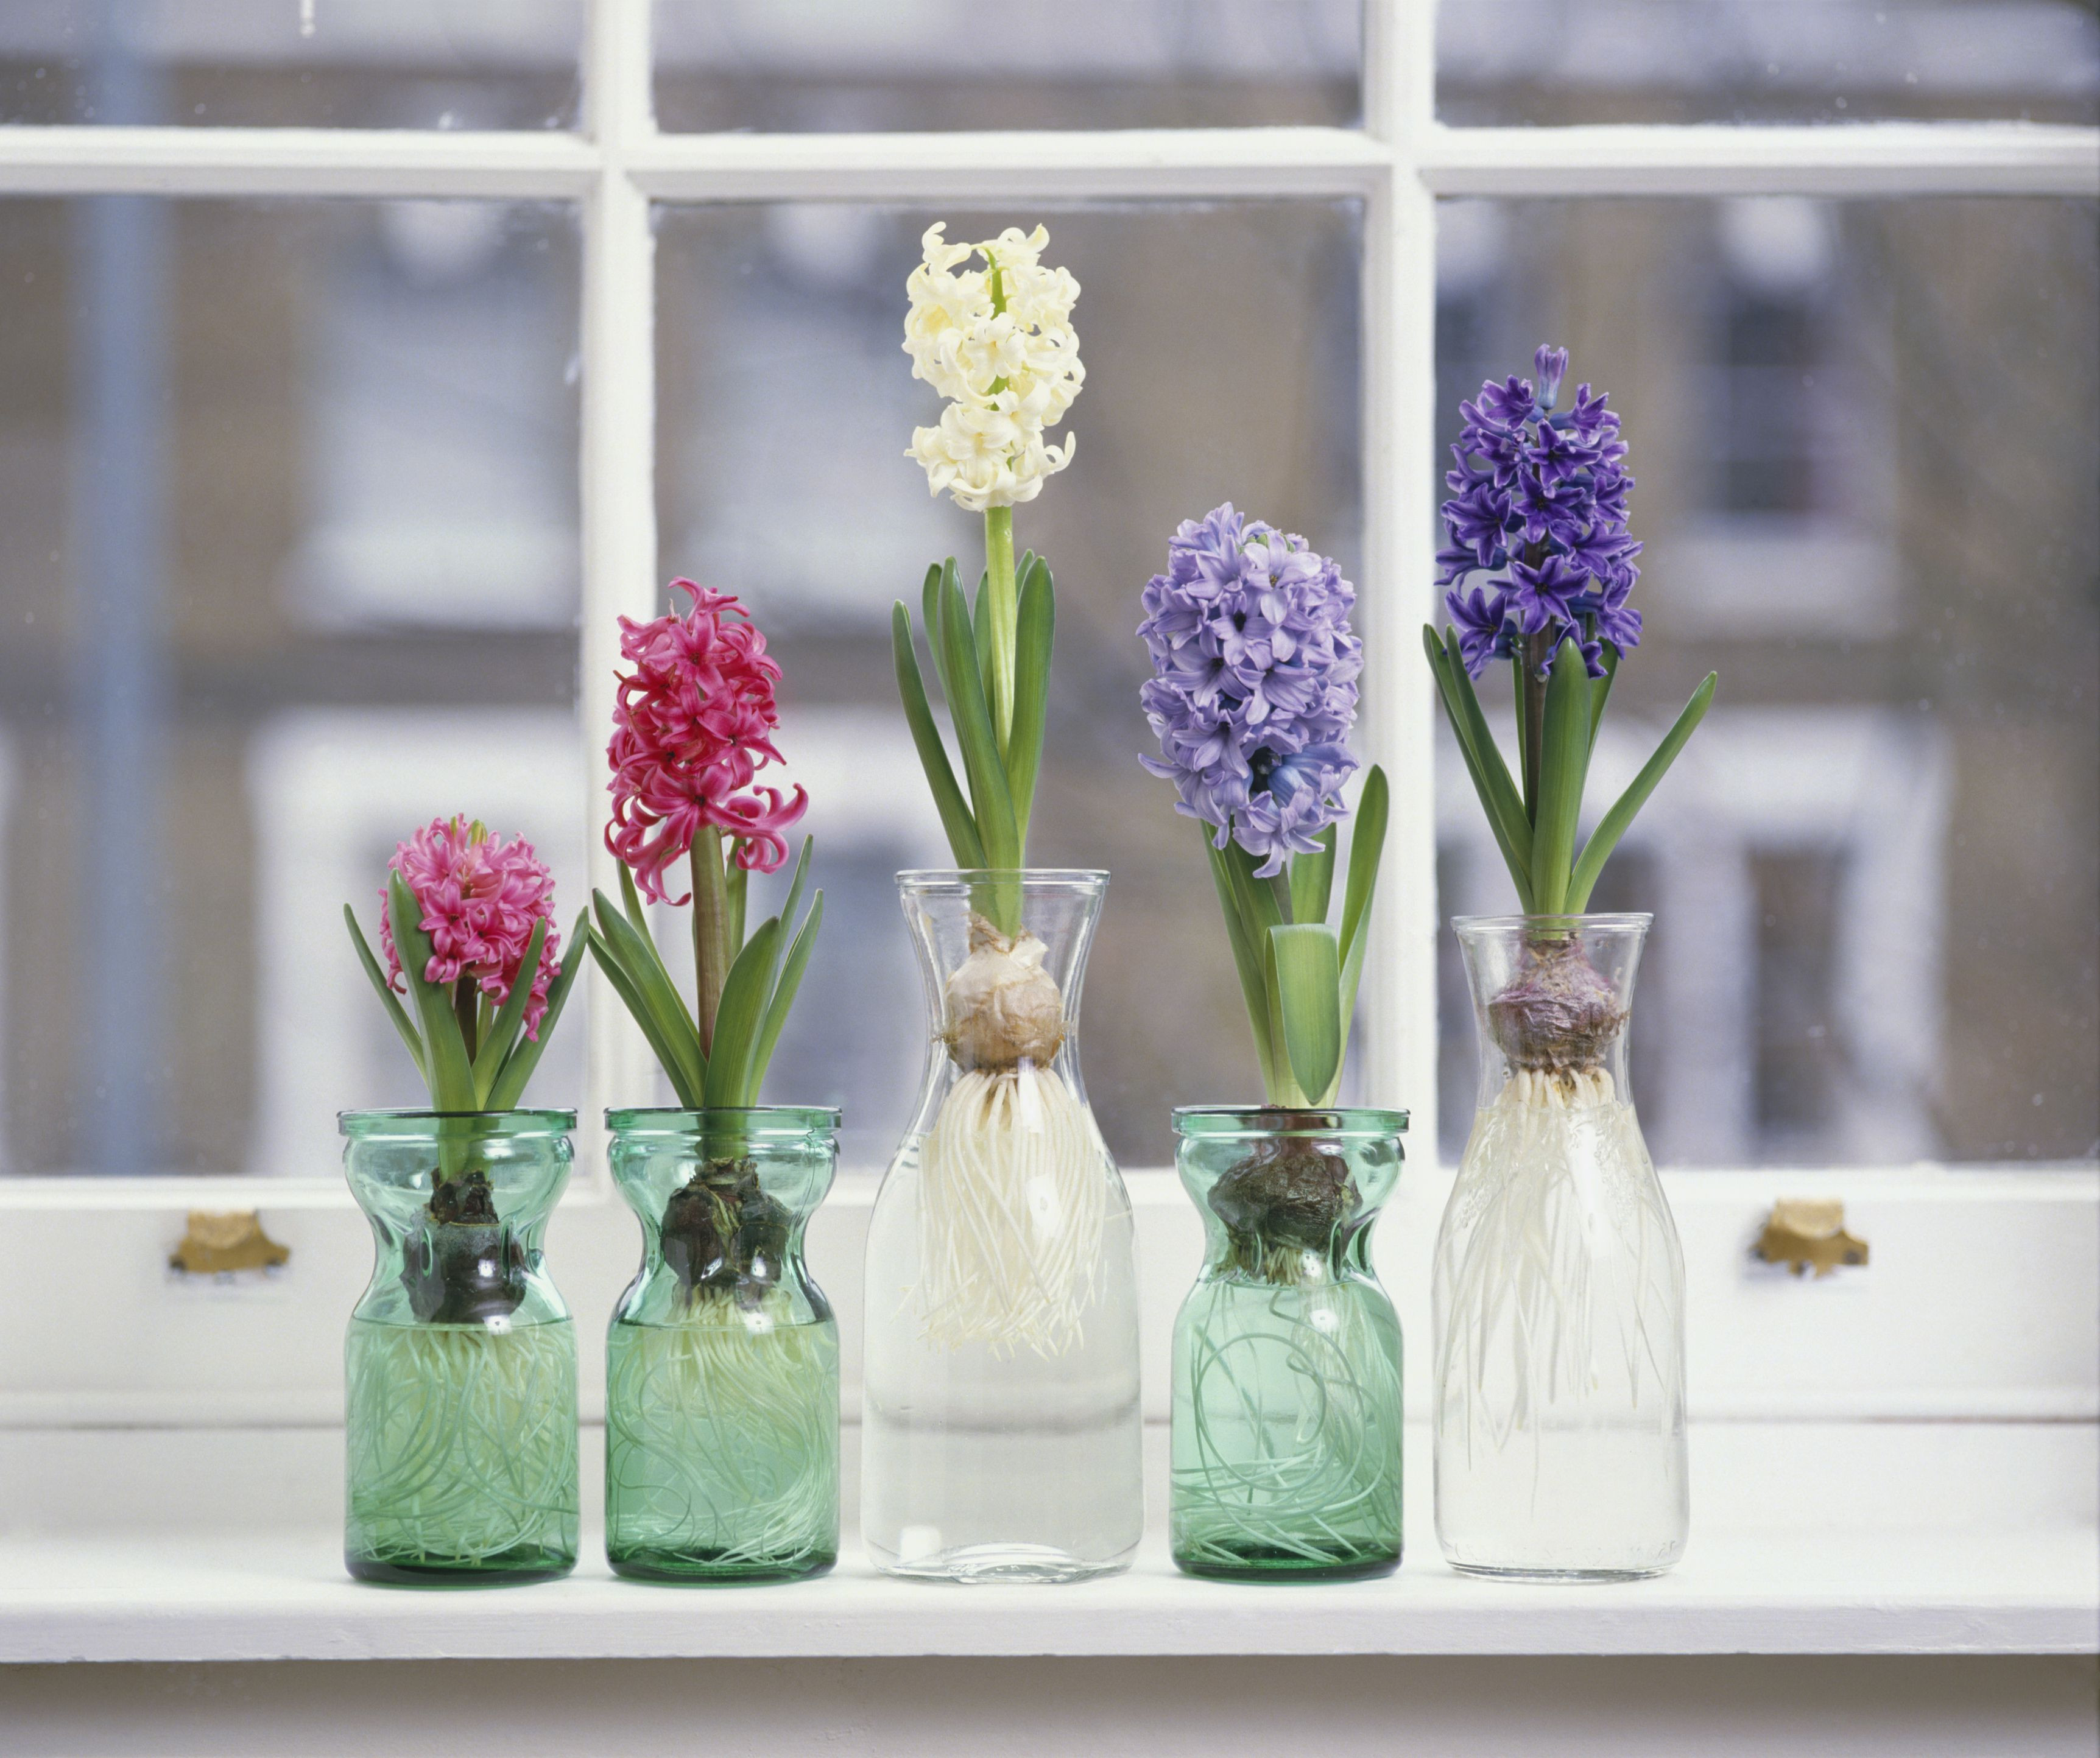 26 Great Purple Glass Marbles for Vases 2024 free download purple glass marbles for vases of how to grow hyacinth flowers indoors inside pink white and purple hyacinthus plants with bulbs in glass jars on window sill 125157739 57c5b8f73df78cc16ead76